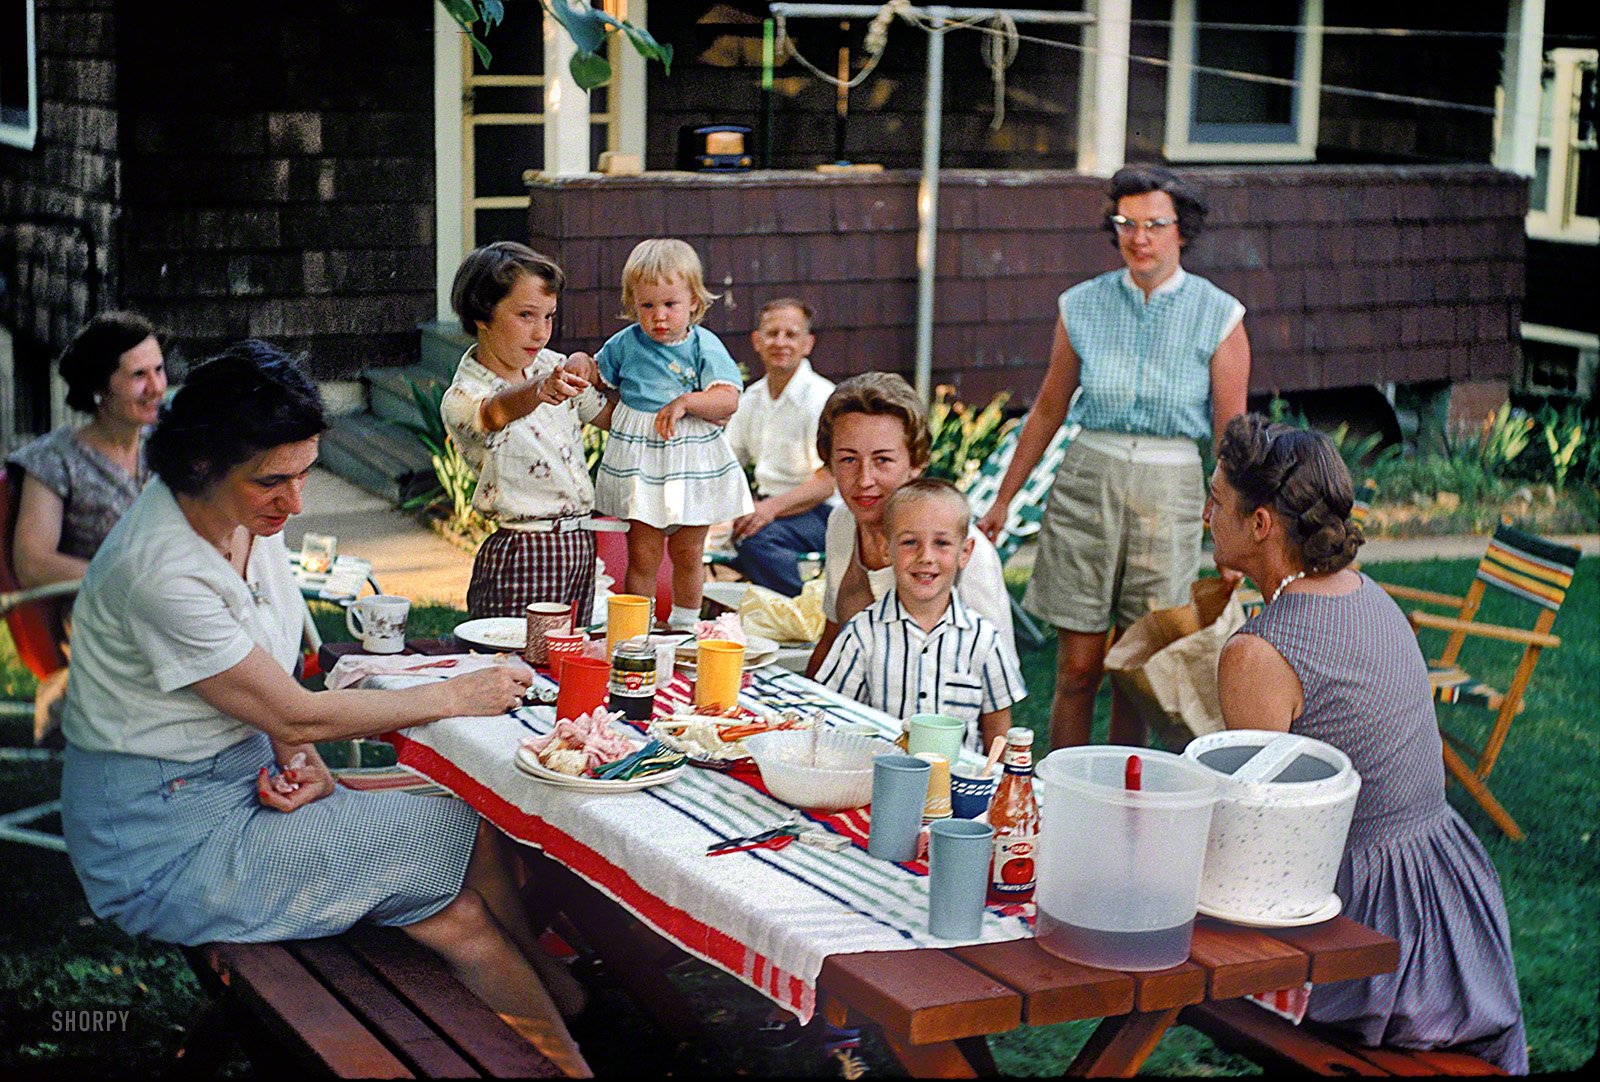 &nbsp; &nbsp; &nbsp; &nbsp; We dedicate this golden (Kodachrome) oldie to picnic-partakers everywhere. Happy Memorial Day weekend from Shorpy!
June 1960 somewhere in Maryland. "Picnic in yard." Janet, of Kermy and Janet, pointing at the camera. Who wants more potato salad? View full size.